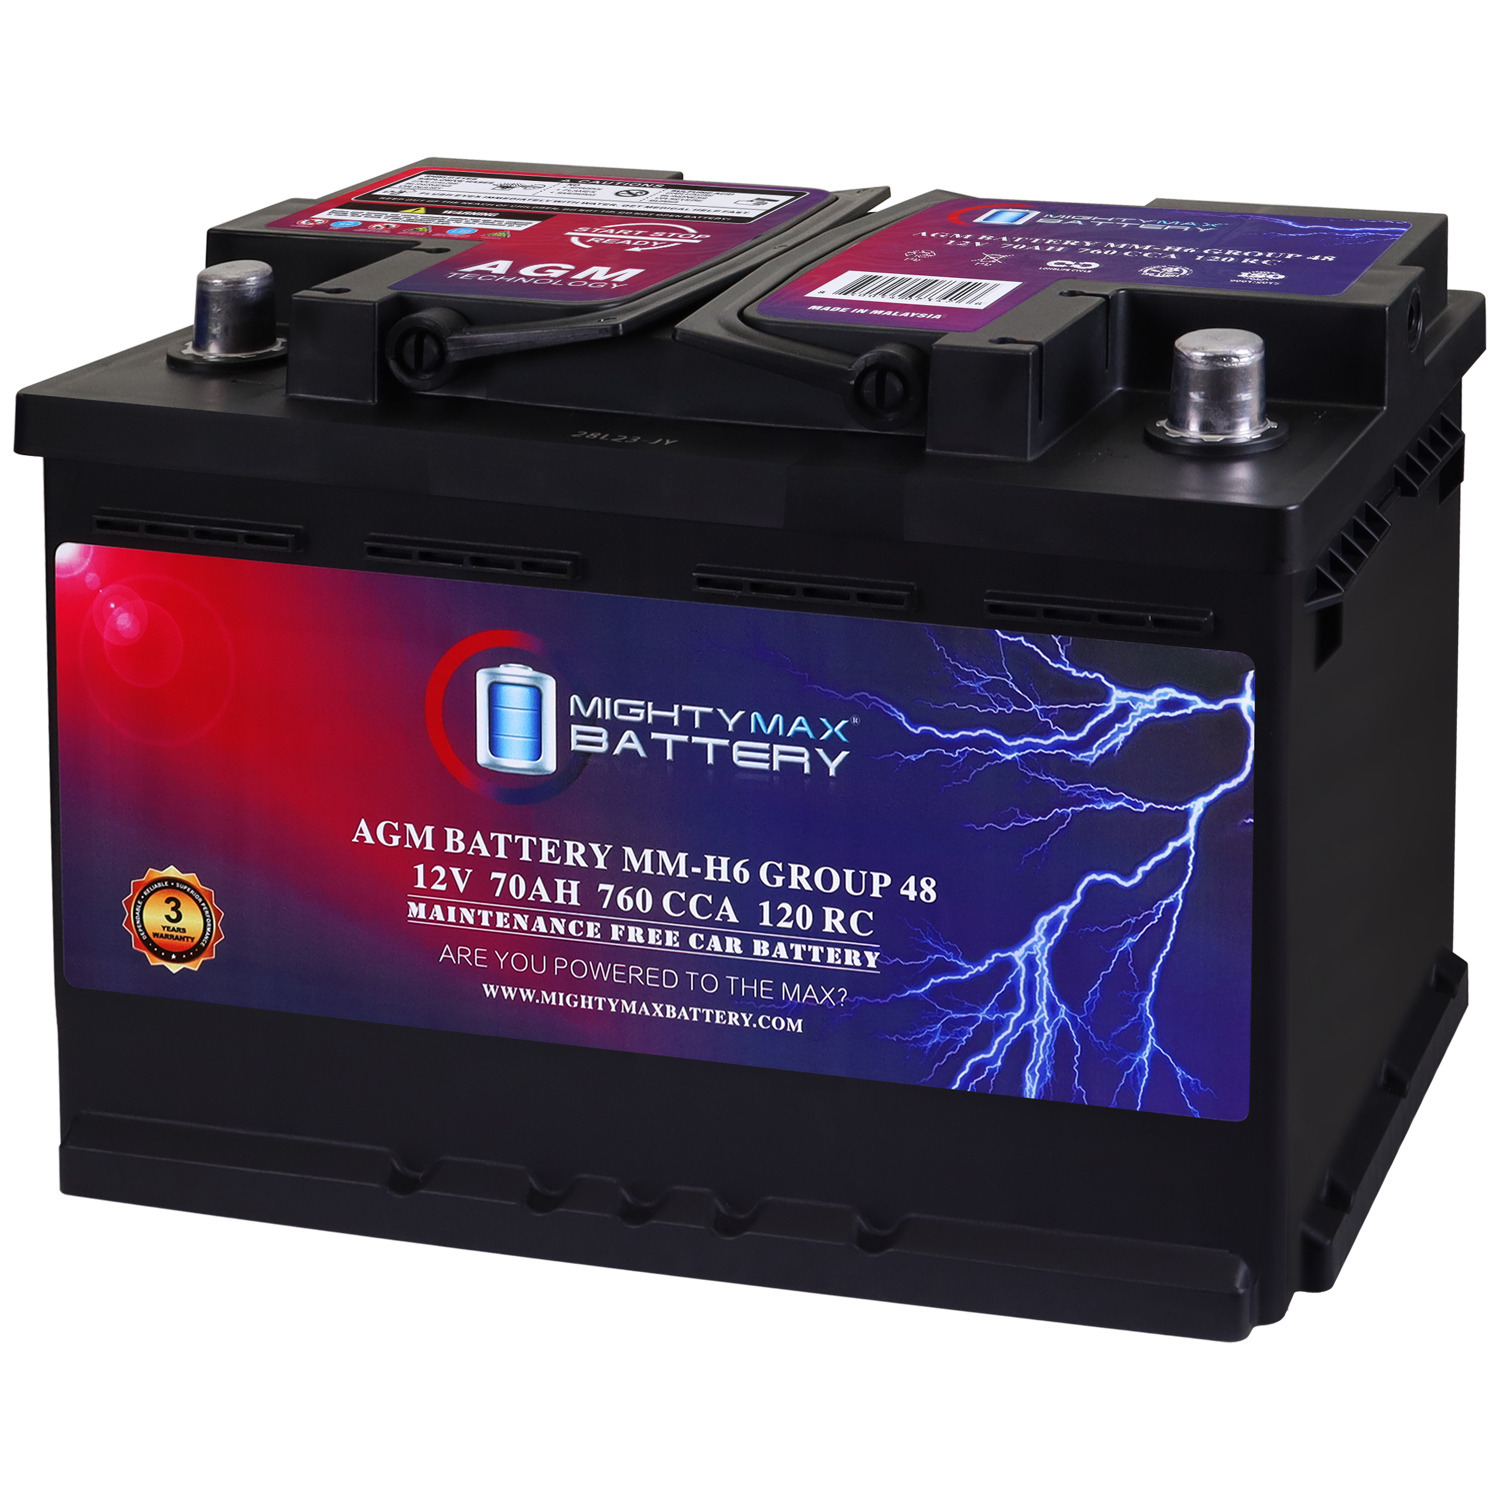 MM-H6 Group 48 12V 70AH 120RC 760CCA Replacement Battery Compatible with Volvo 960 92-97